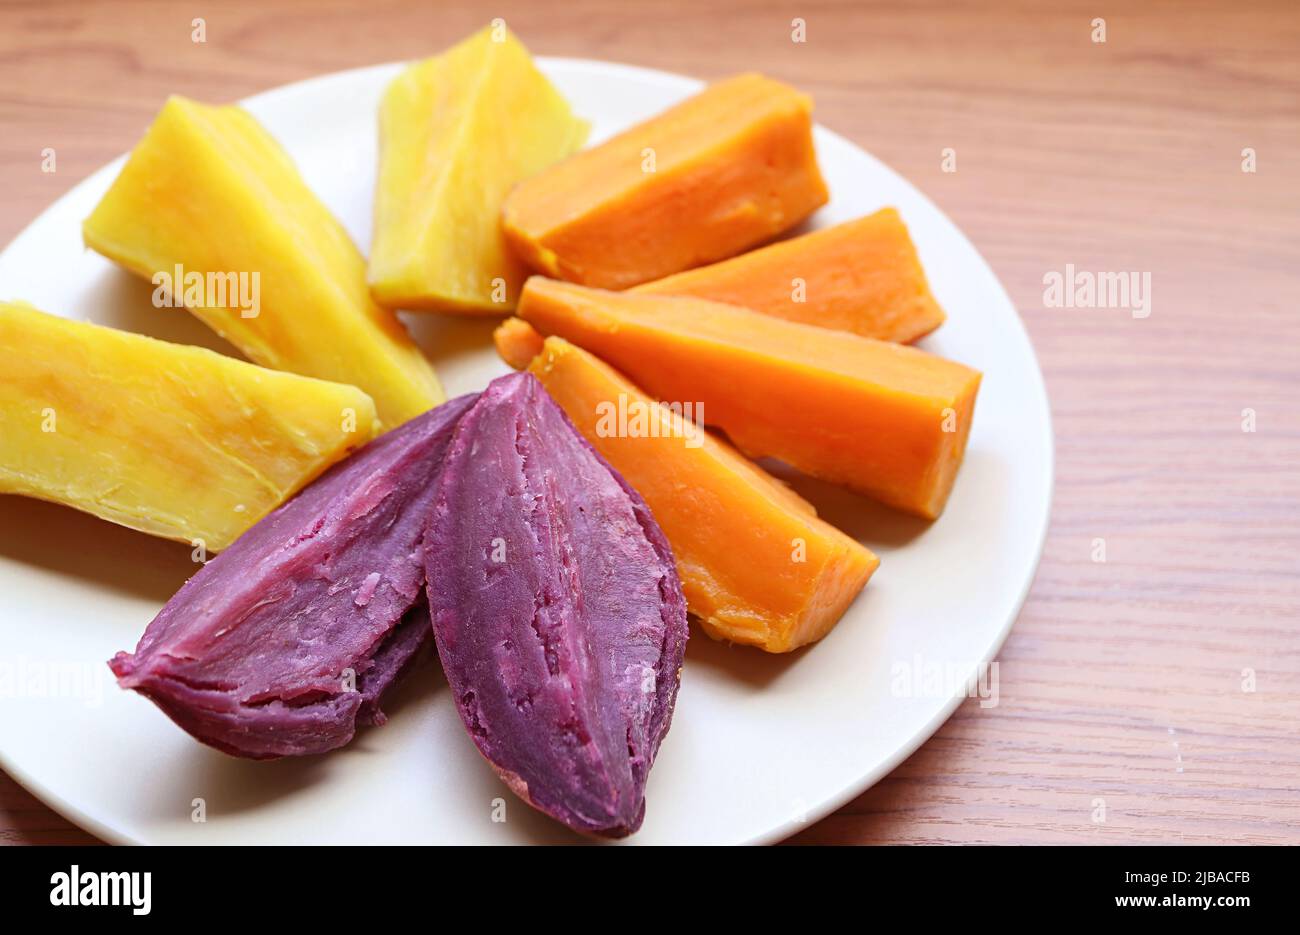 Plate of three different color steamed sweet potatoes, for a concept of good source of healthy carbs Stock Photo